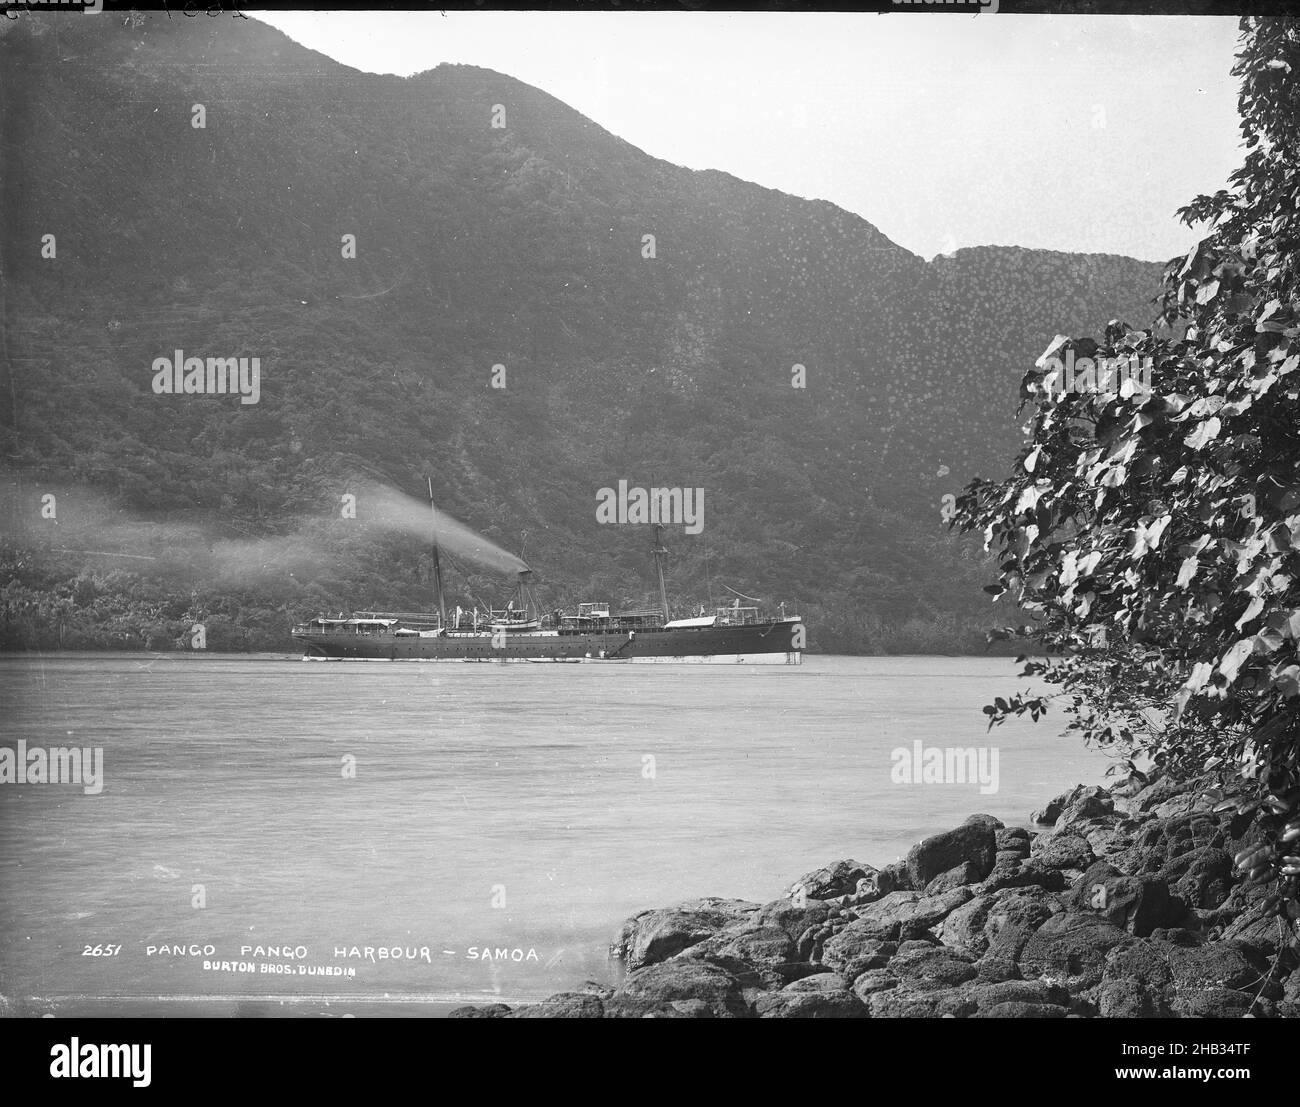 Pango-Pango (sic) Harbour - Samoa, Burton Brothers studio, photography studio, July 1884, Dunedin, black-and-white photography, Rocky foreshore with foliage in right foreground, sea with two masted ship and funnel, smoke drifting from it, facing right. Ladder down on ship with people climbing from longboat. High rising mountain in background. Boat is the 'Wairarapa Stock Photo